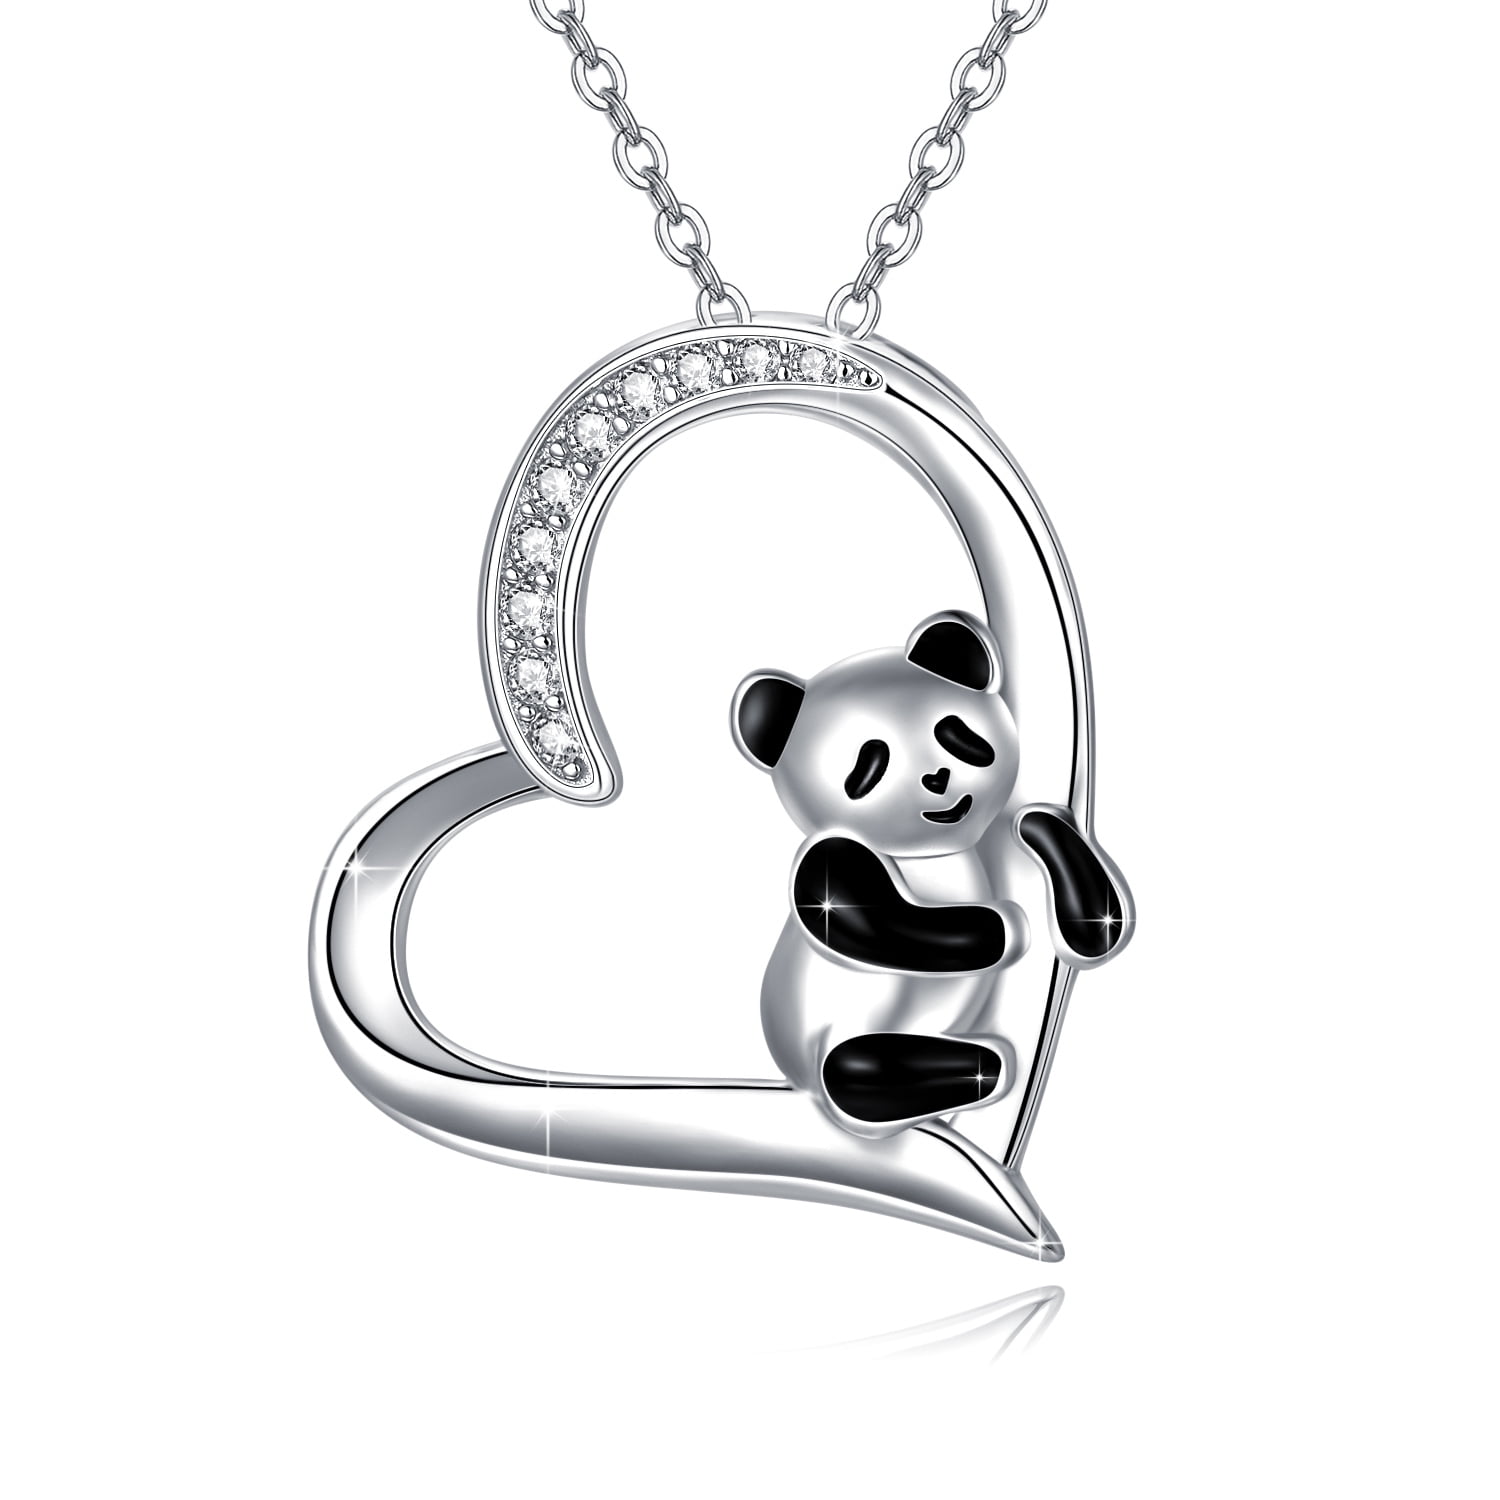 CUOKA MIRACLE Panda Necklace S925 Sterling Silver Cute Panda Pendant Animal Necklace Gift for Panda Lover Women 